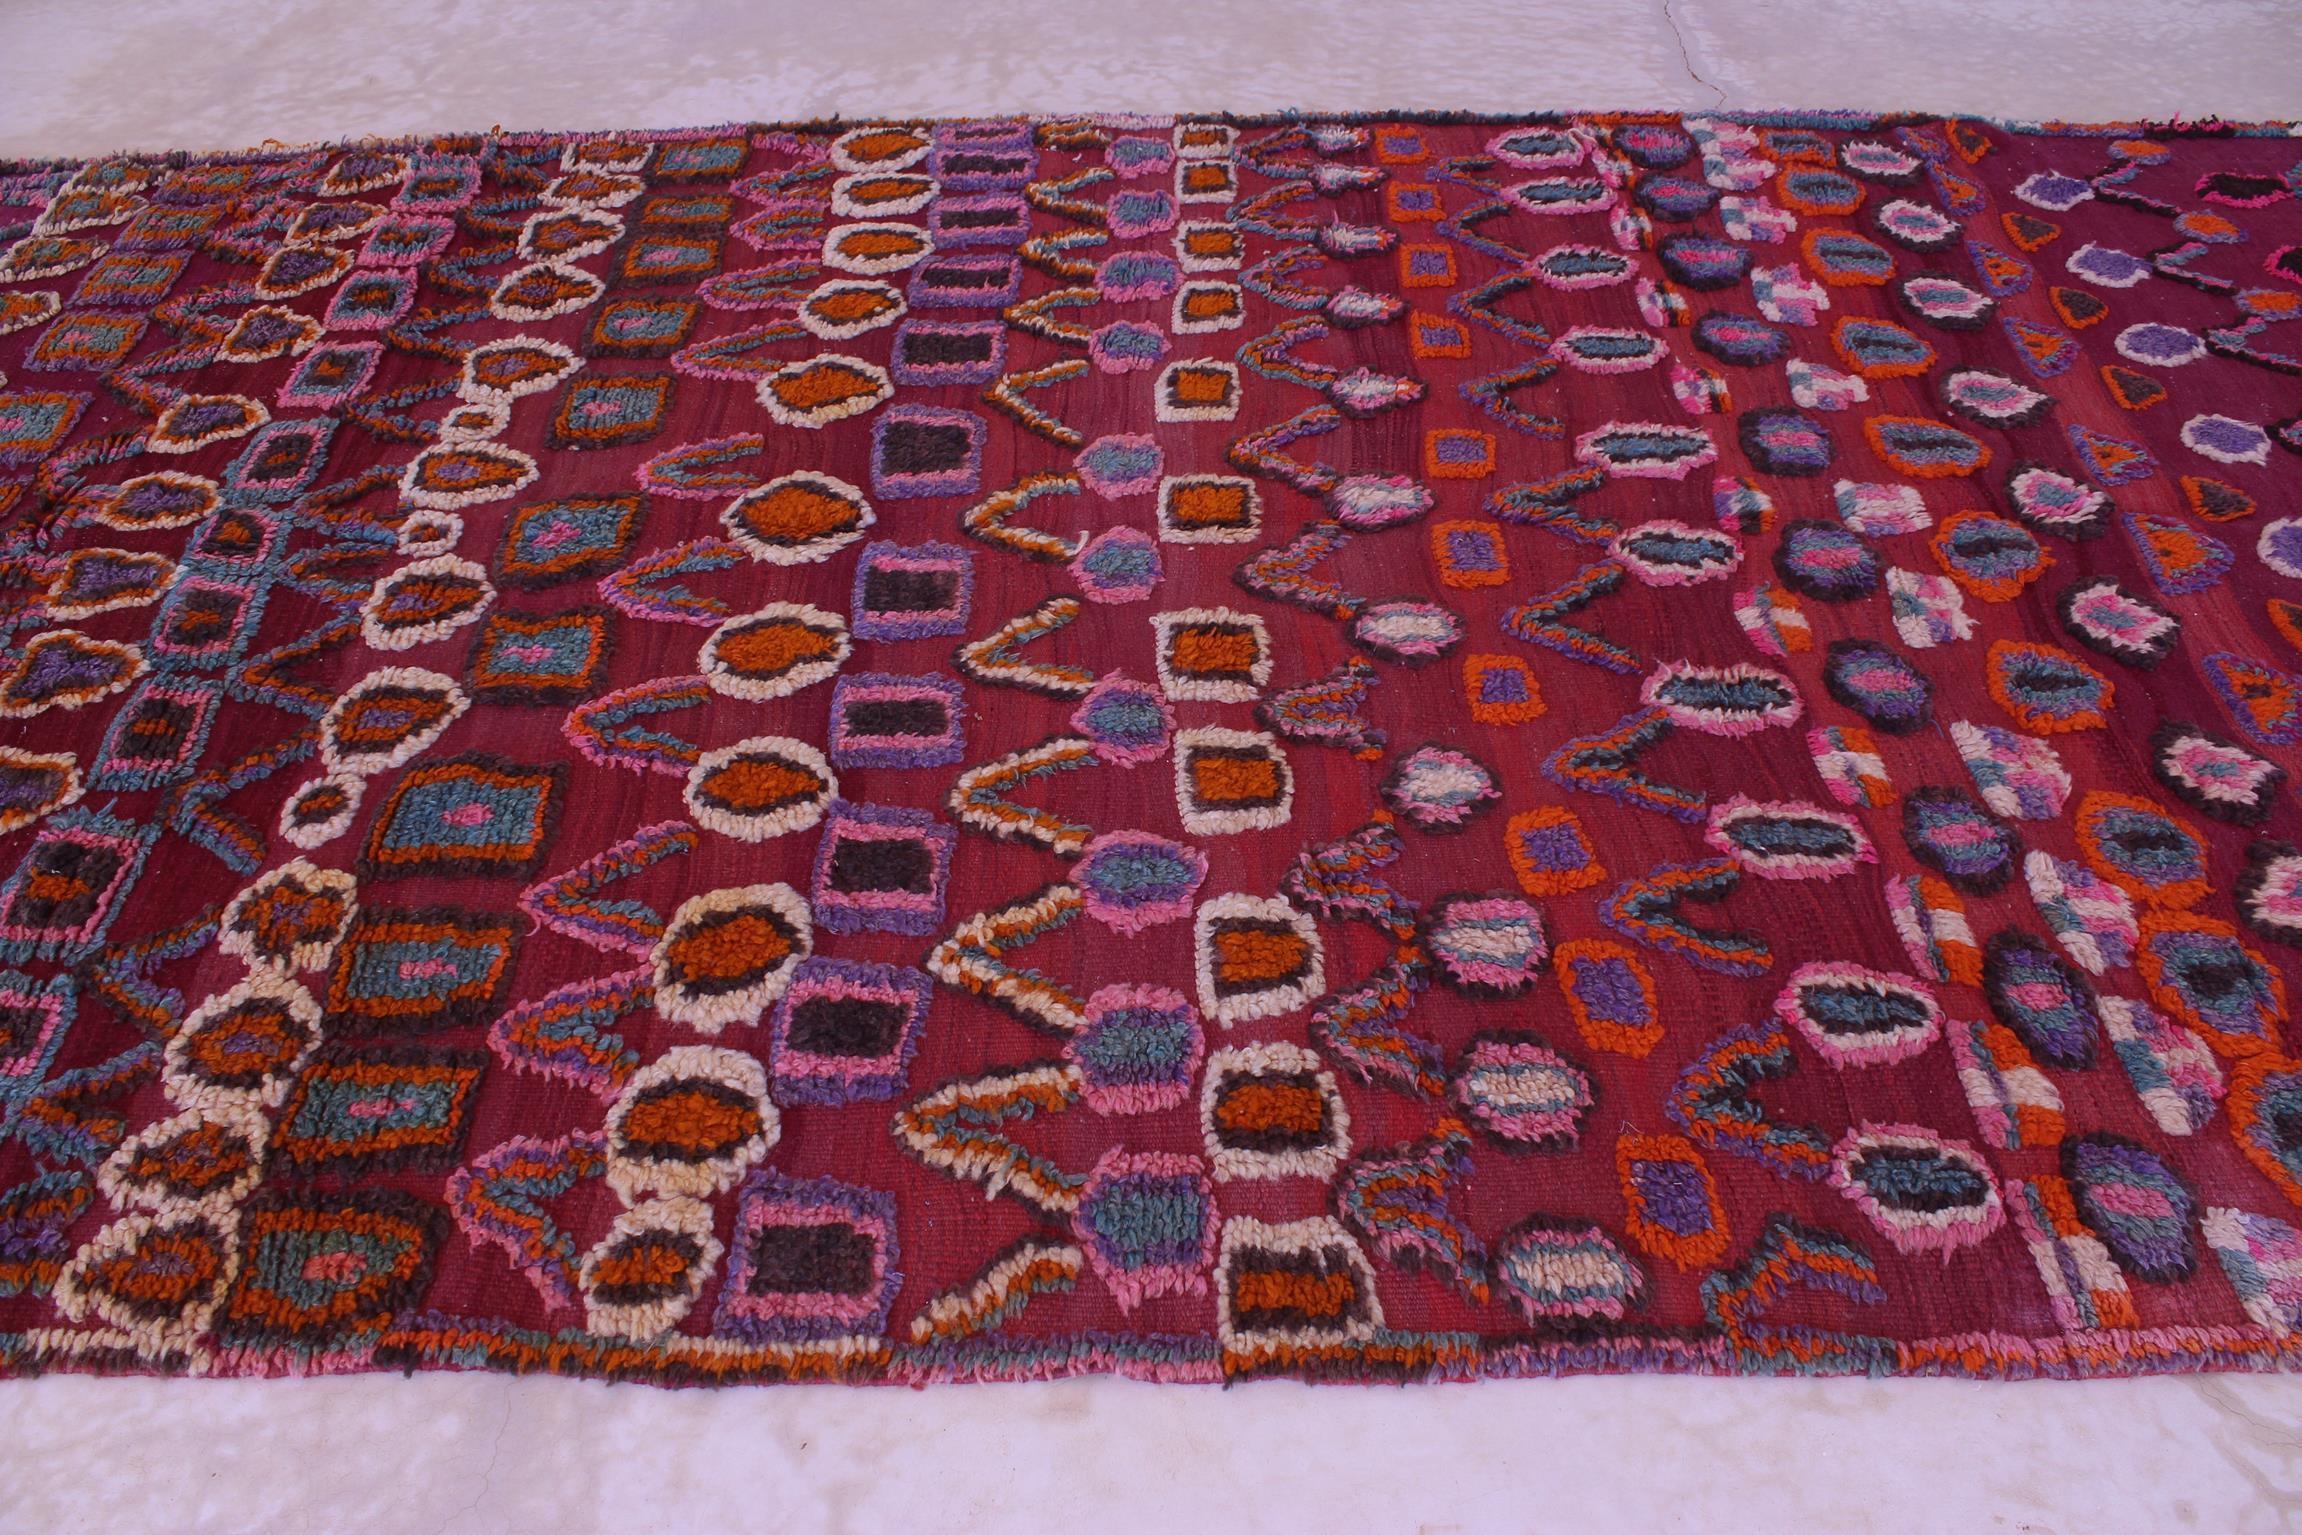 Vintage Moroccan Talsint rug - Wine purple - 6.2x15feet / 189x457cm In Good Condition For Sale In Marrakech, MA